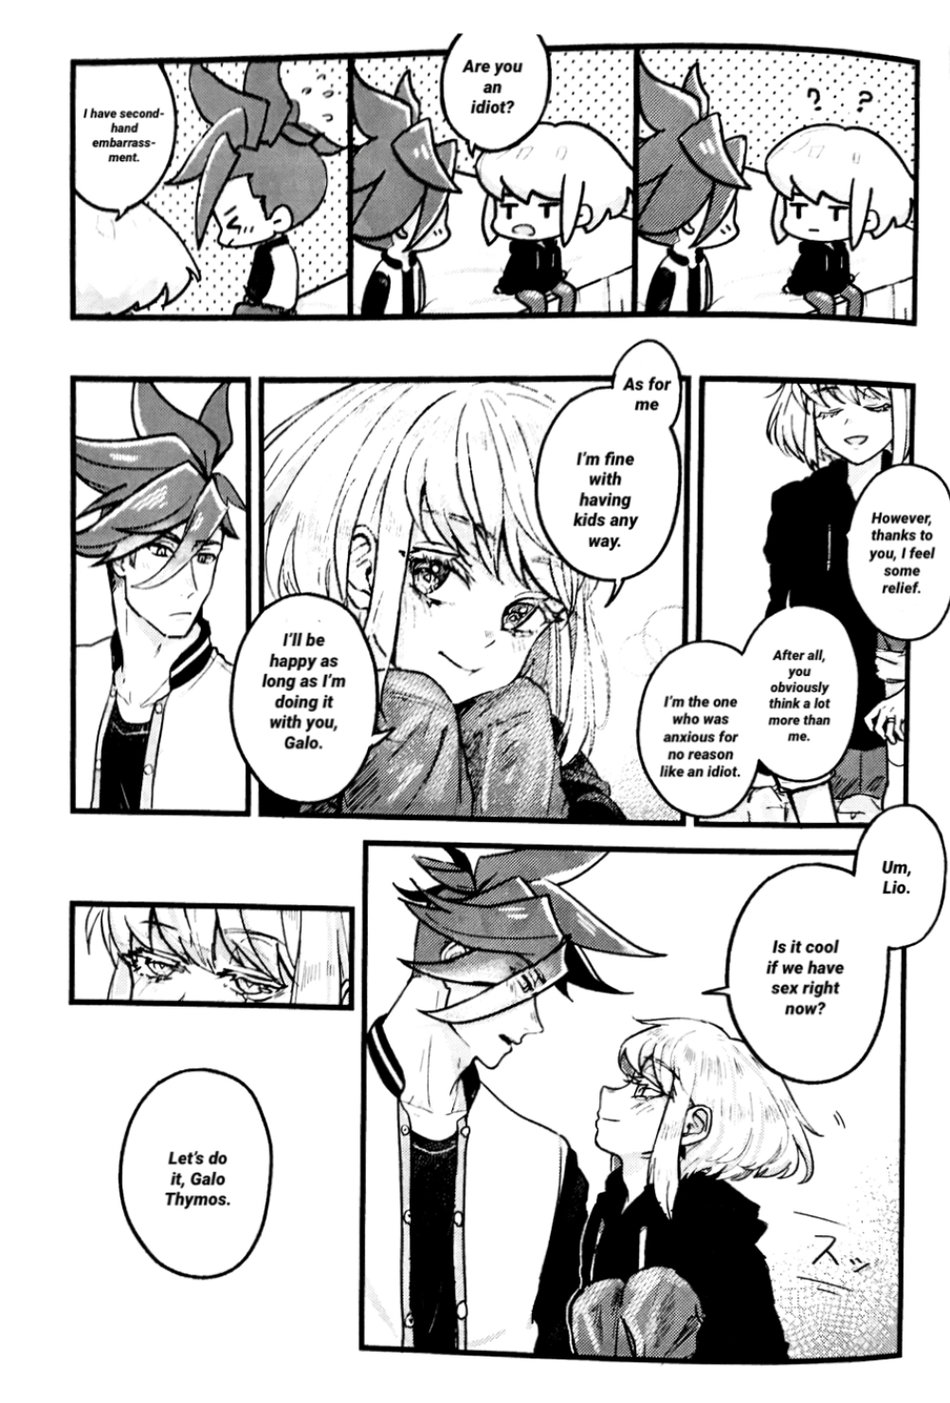 [Tamaki] Becoming a Family [English] [@dykewpie] page 6 full